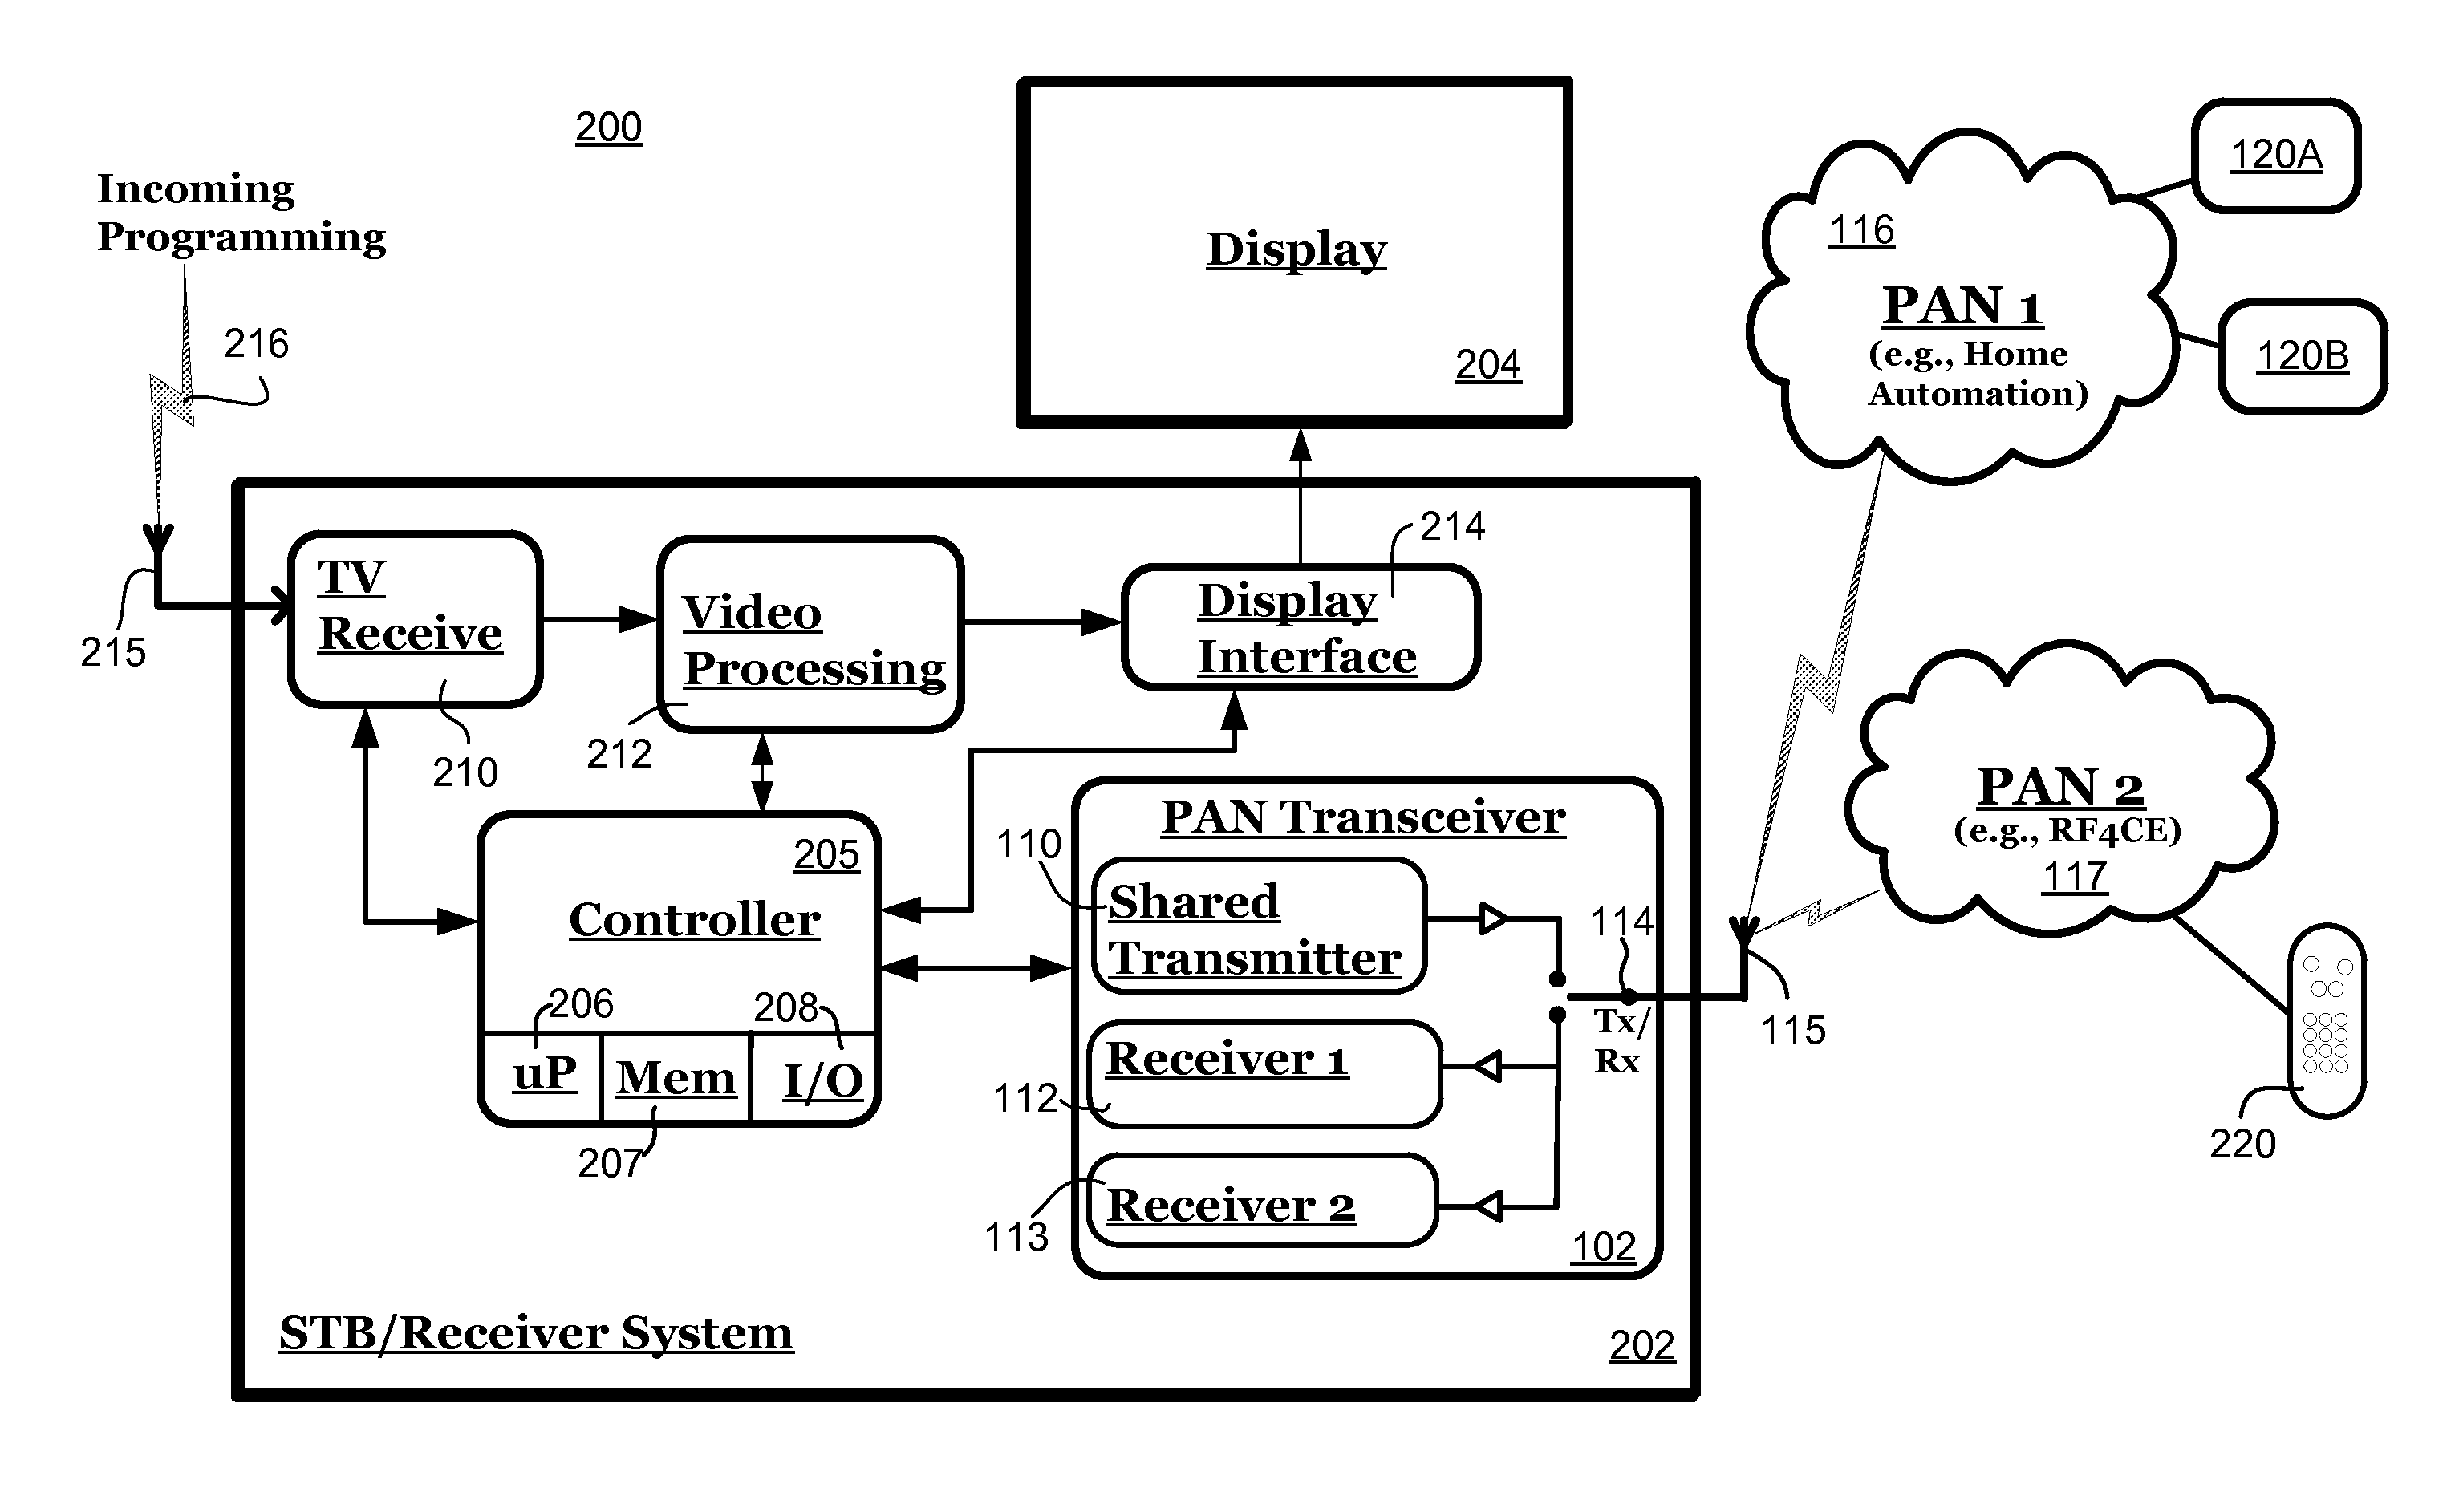 Multi personal area network (PAN) radio with shared transmitter